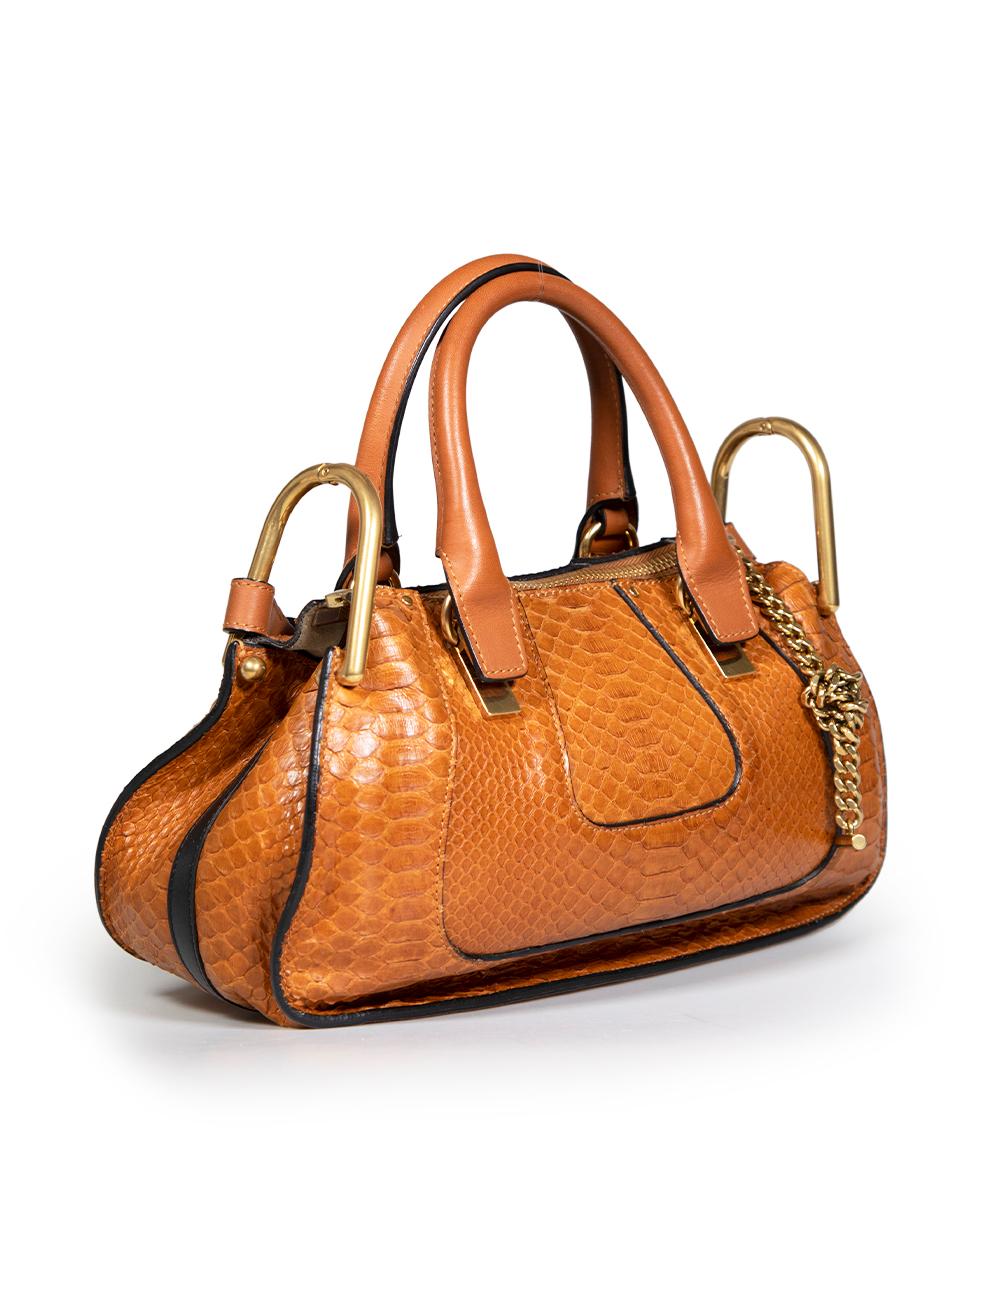 CONDITION is Very good. Hardly any visible wear to bag is evident on this used Chloé designer resale item.
 
 Details
 Model: Small Hayley
 Caramel brown
 Python
 Medium handbag
 Calfskin leather trim
 2x Rolled top handles
 Gold tone hardware
 1x